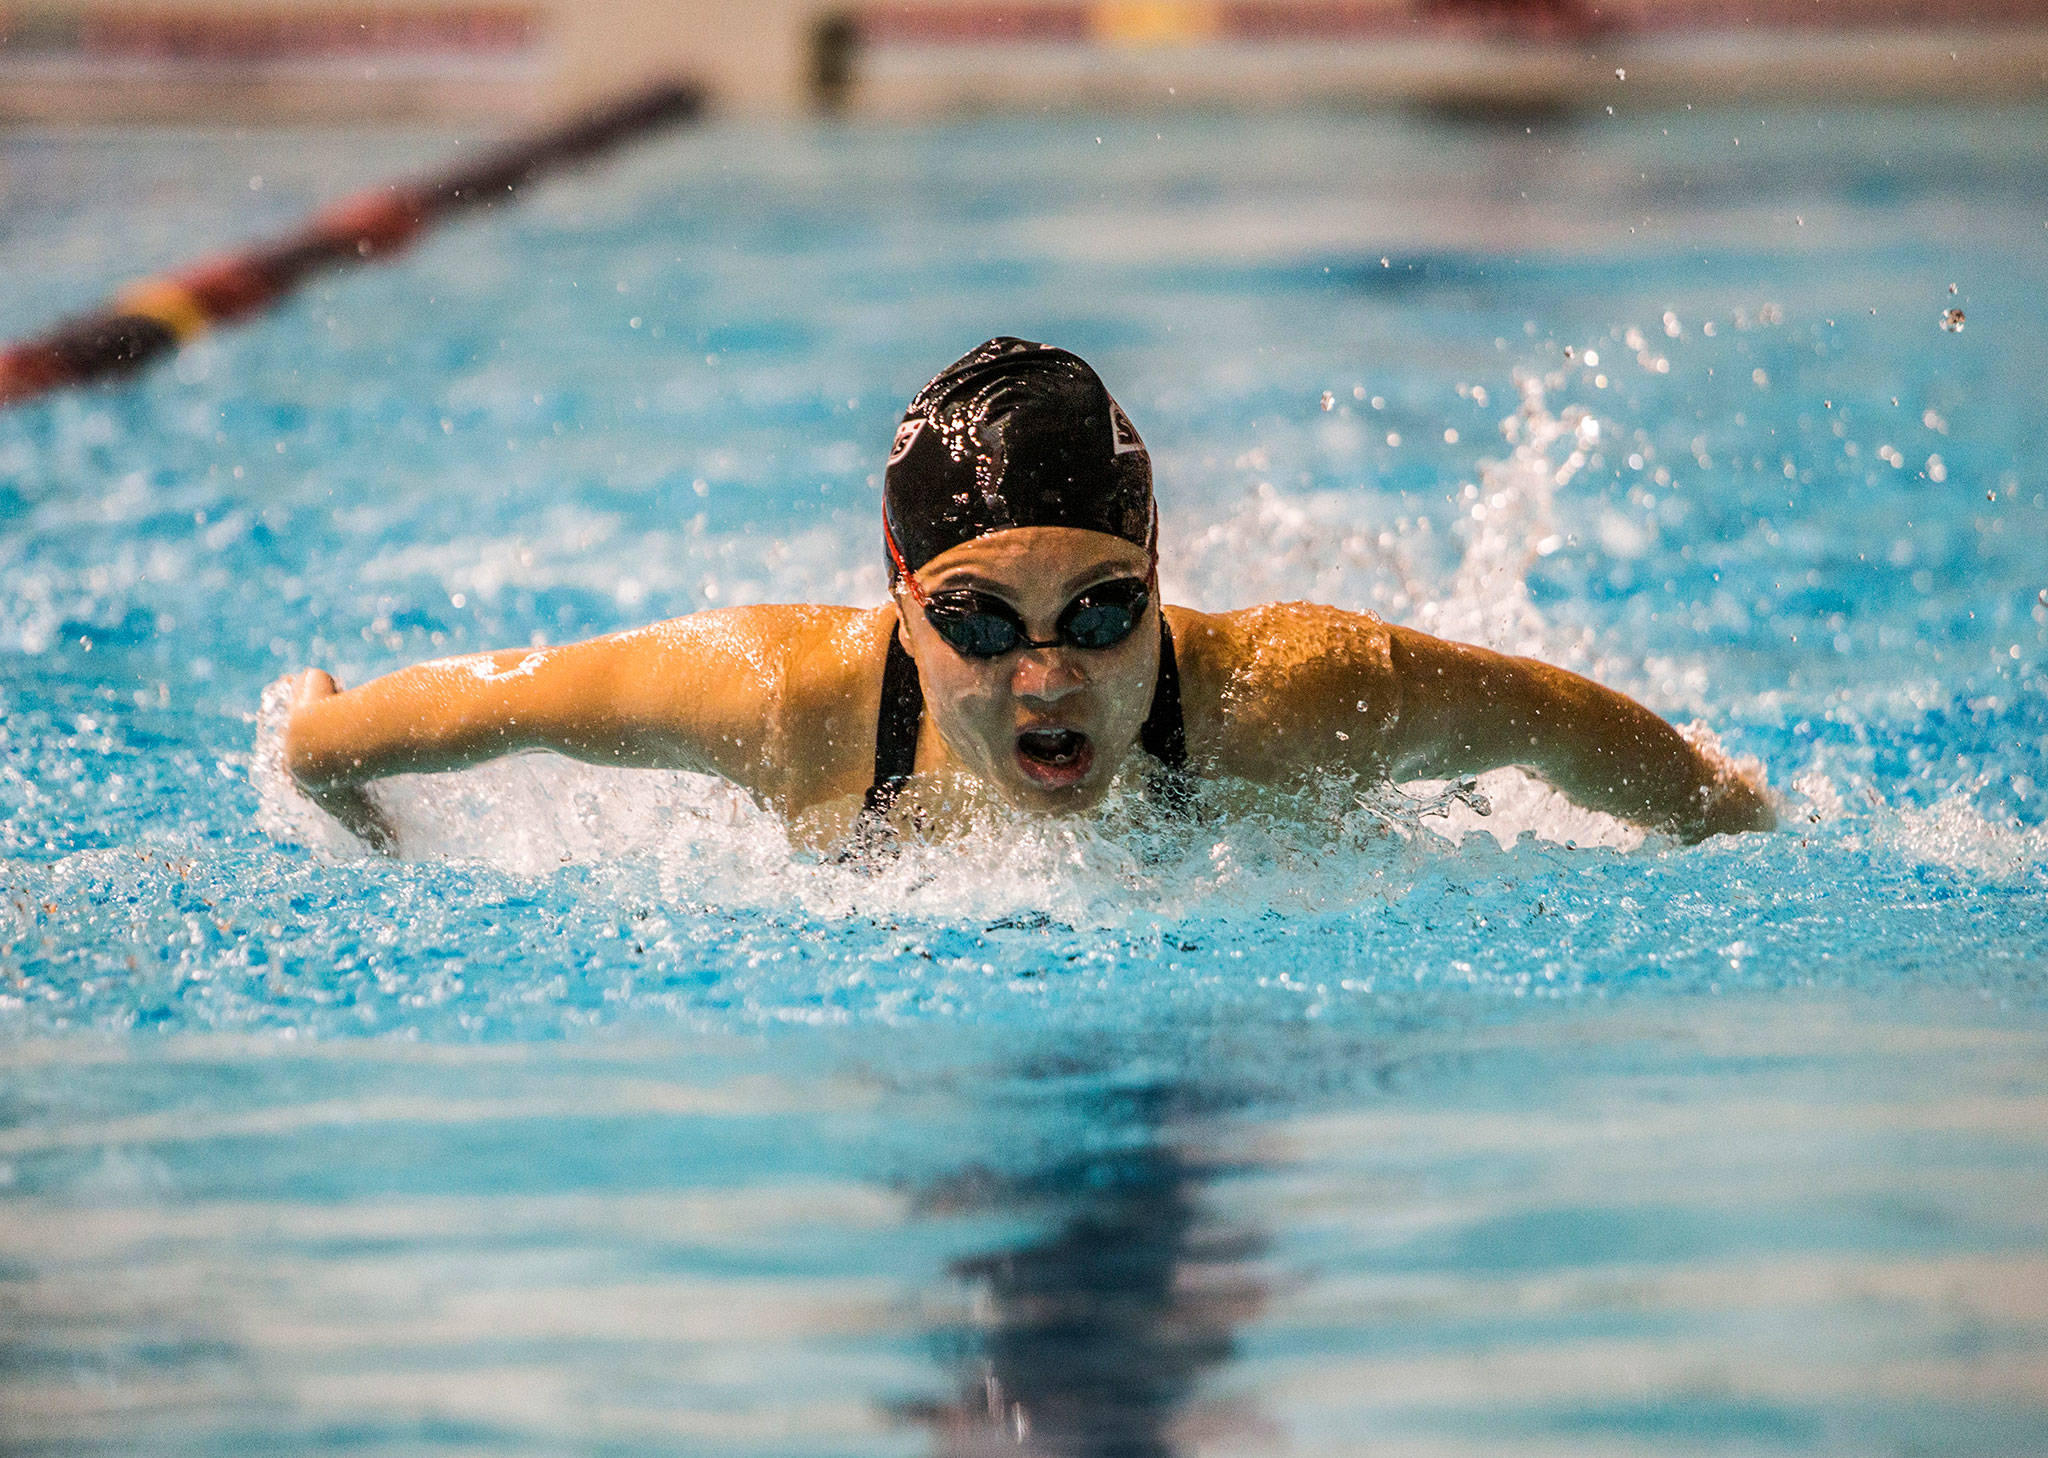 Stanwood’s Jetlynn Hau won the Class 3A state title in the 100-yard breaststroke last year after back-to-back third-place state finishes the previous two seasons. (Olivia Vanni / The Herald)